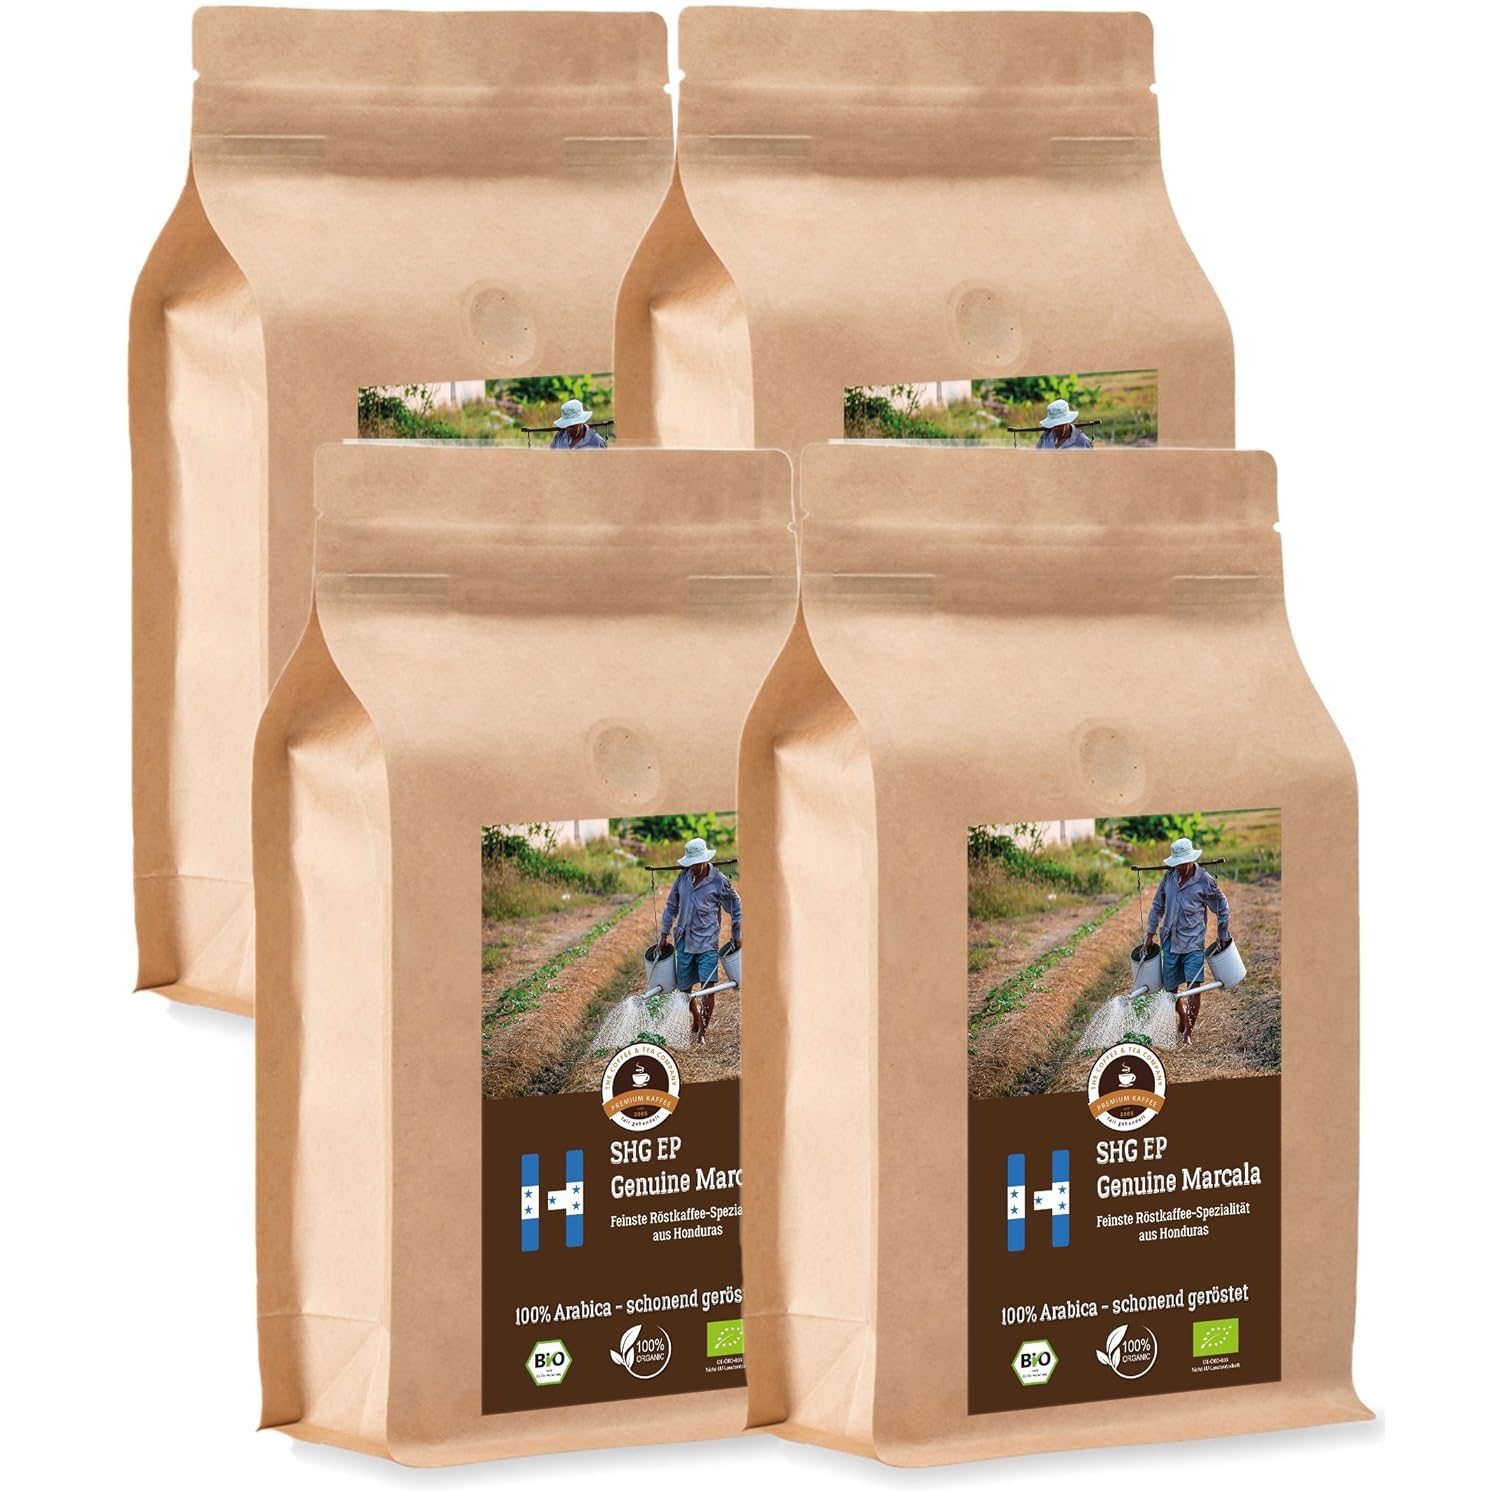 Coffee Globetrotter - Organic Honduras Genuine Marcala - 4 x 1000 g Finely Ground - for Fully Automatic Coffee Grinder - Roasted Coffee from Organic Cultivation | Gastropack Economy Pack